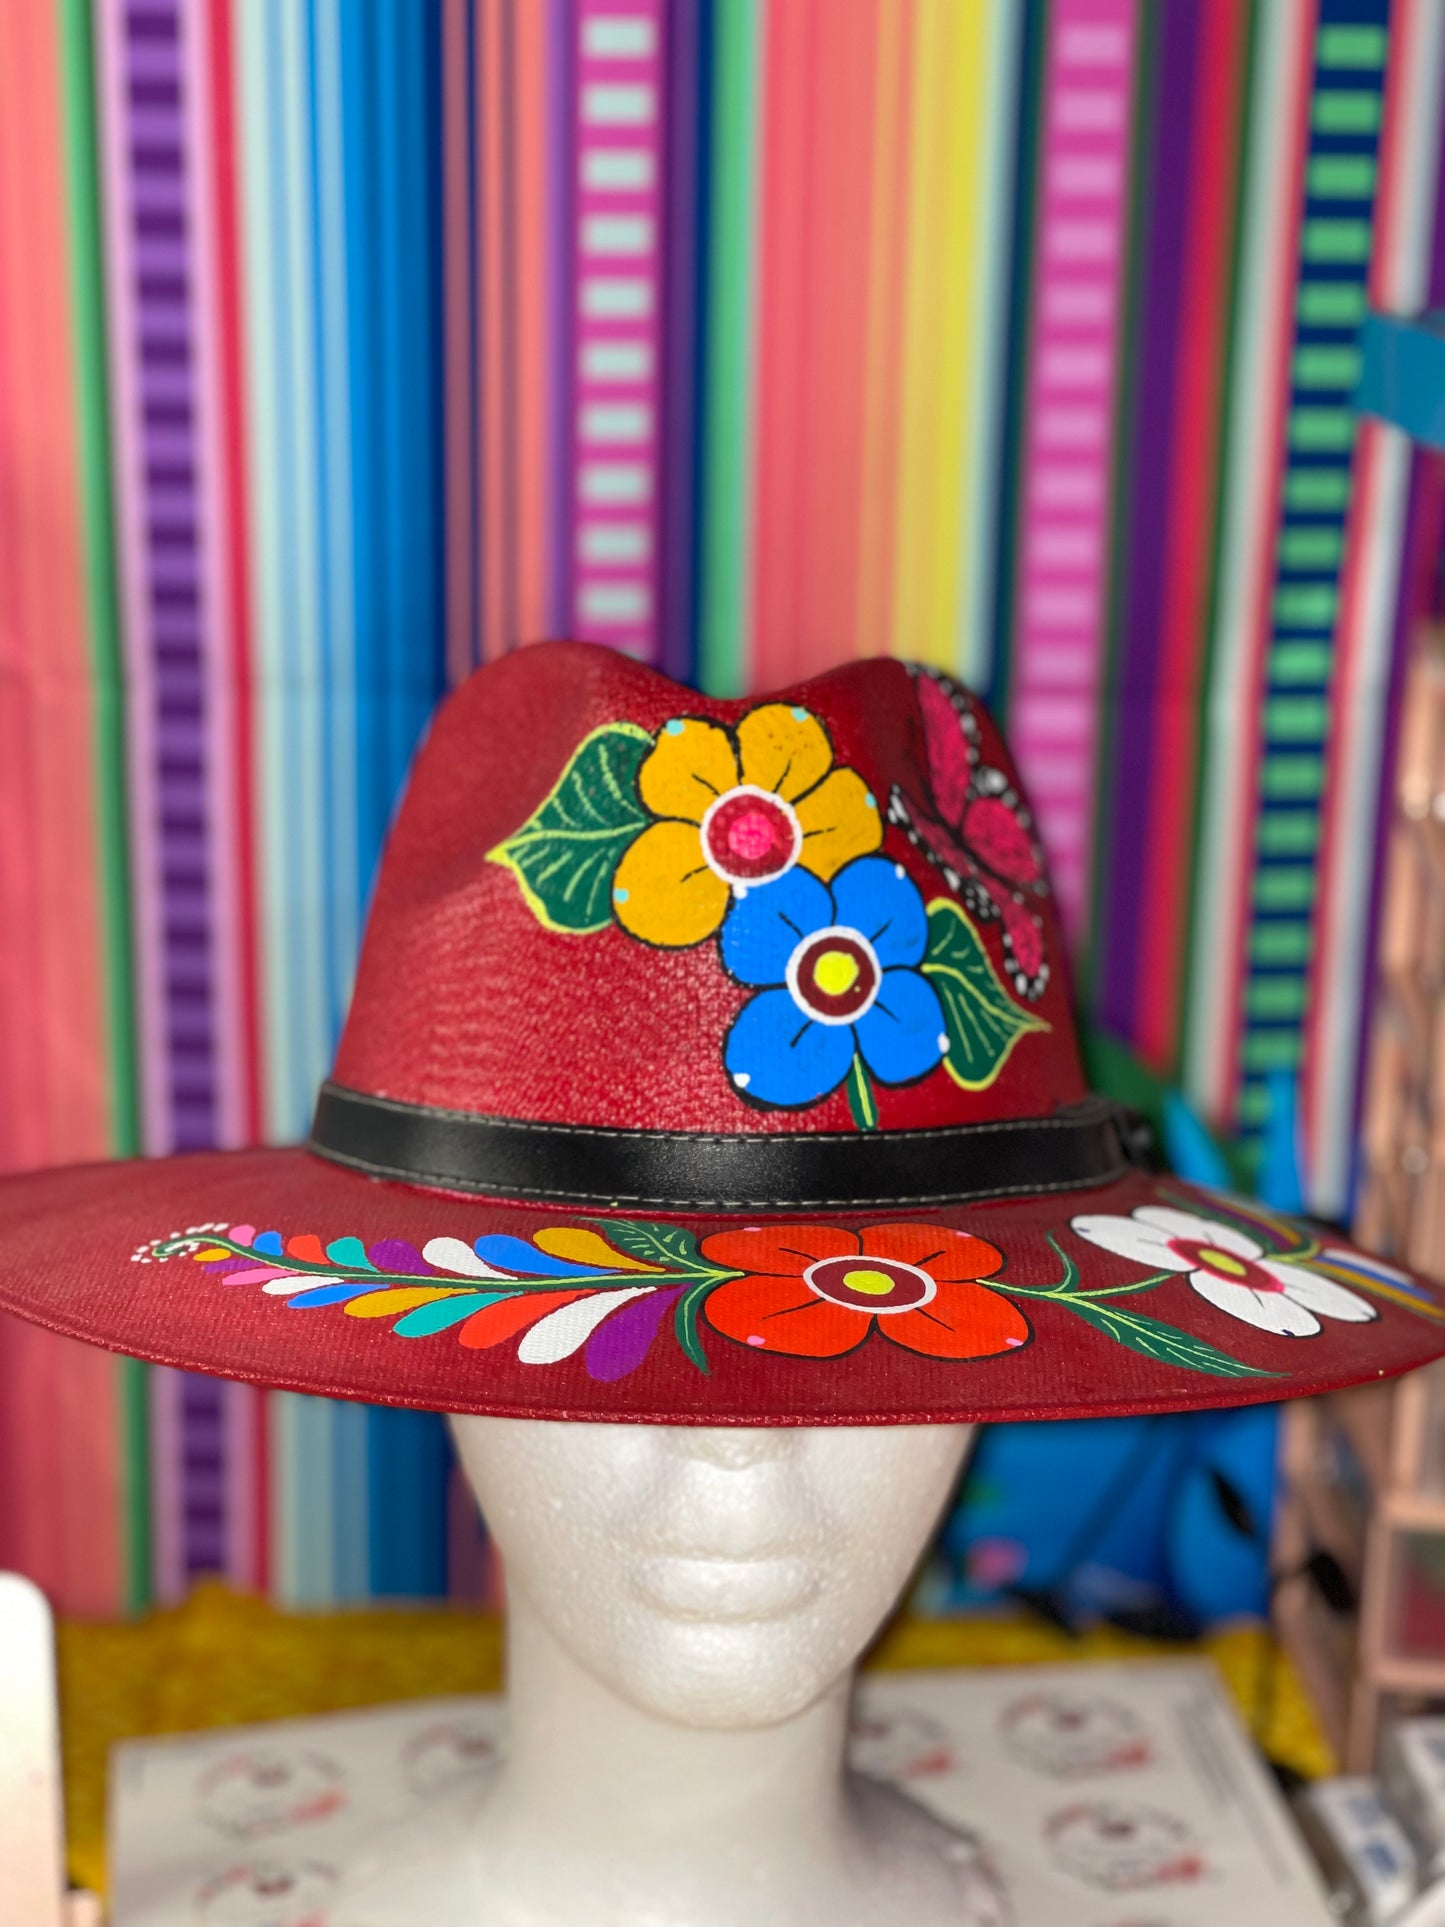 Amanecer Hand-Painted Sombreros